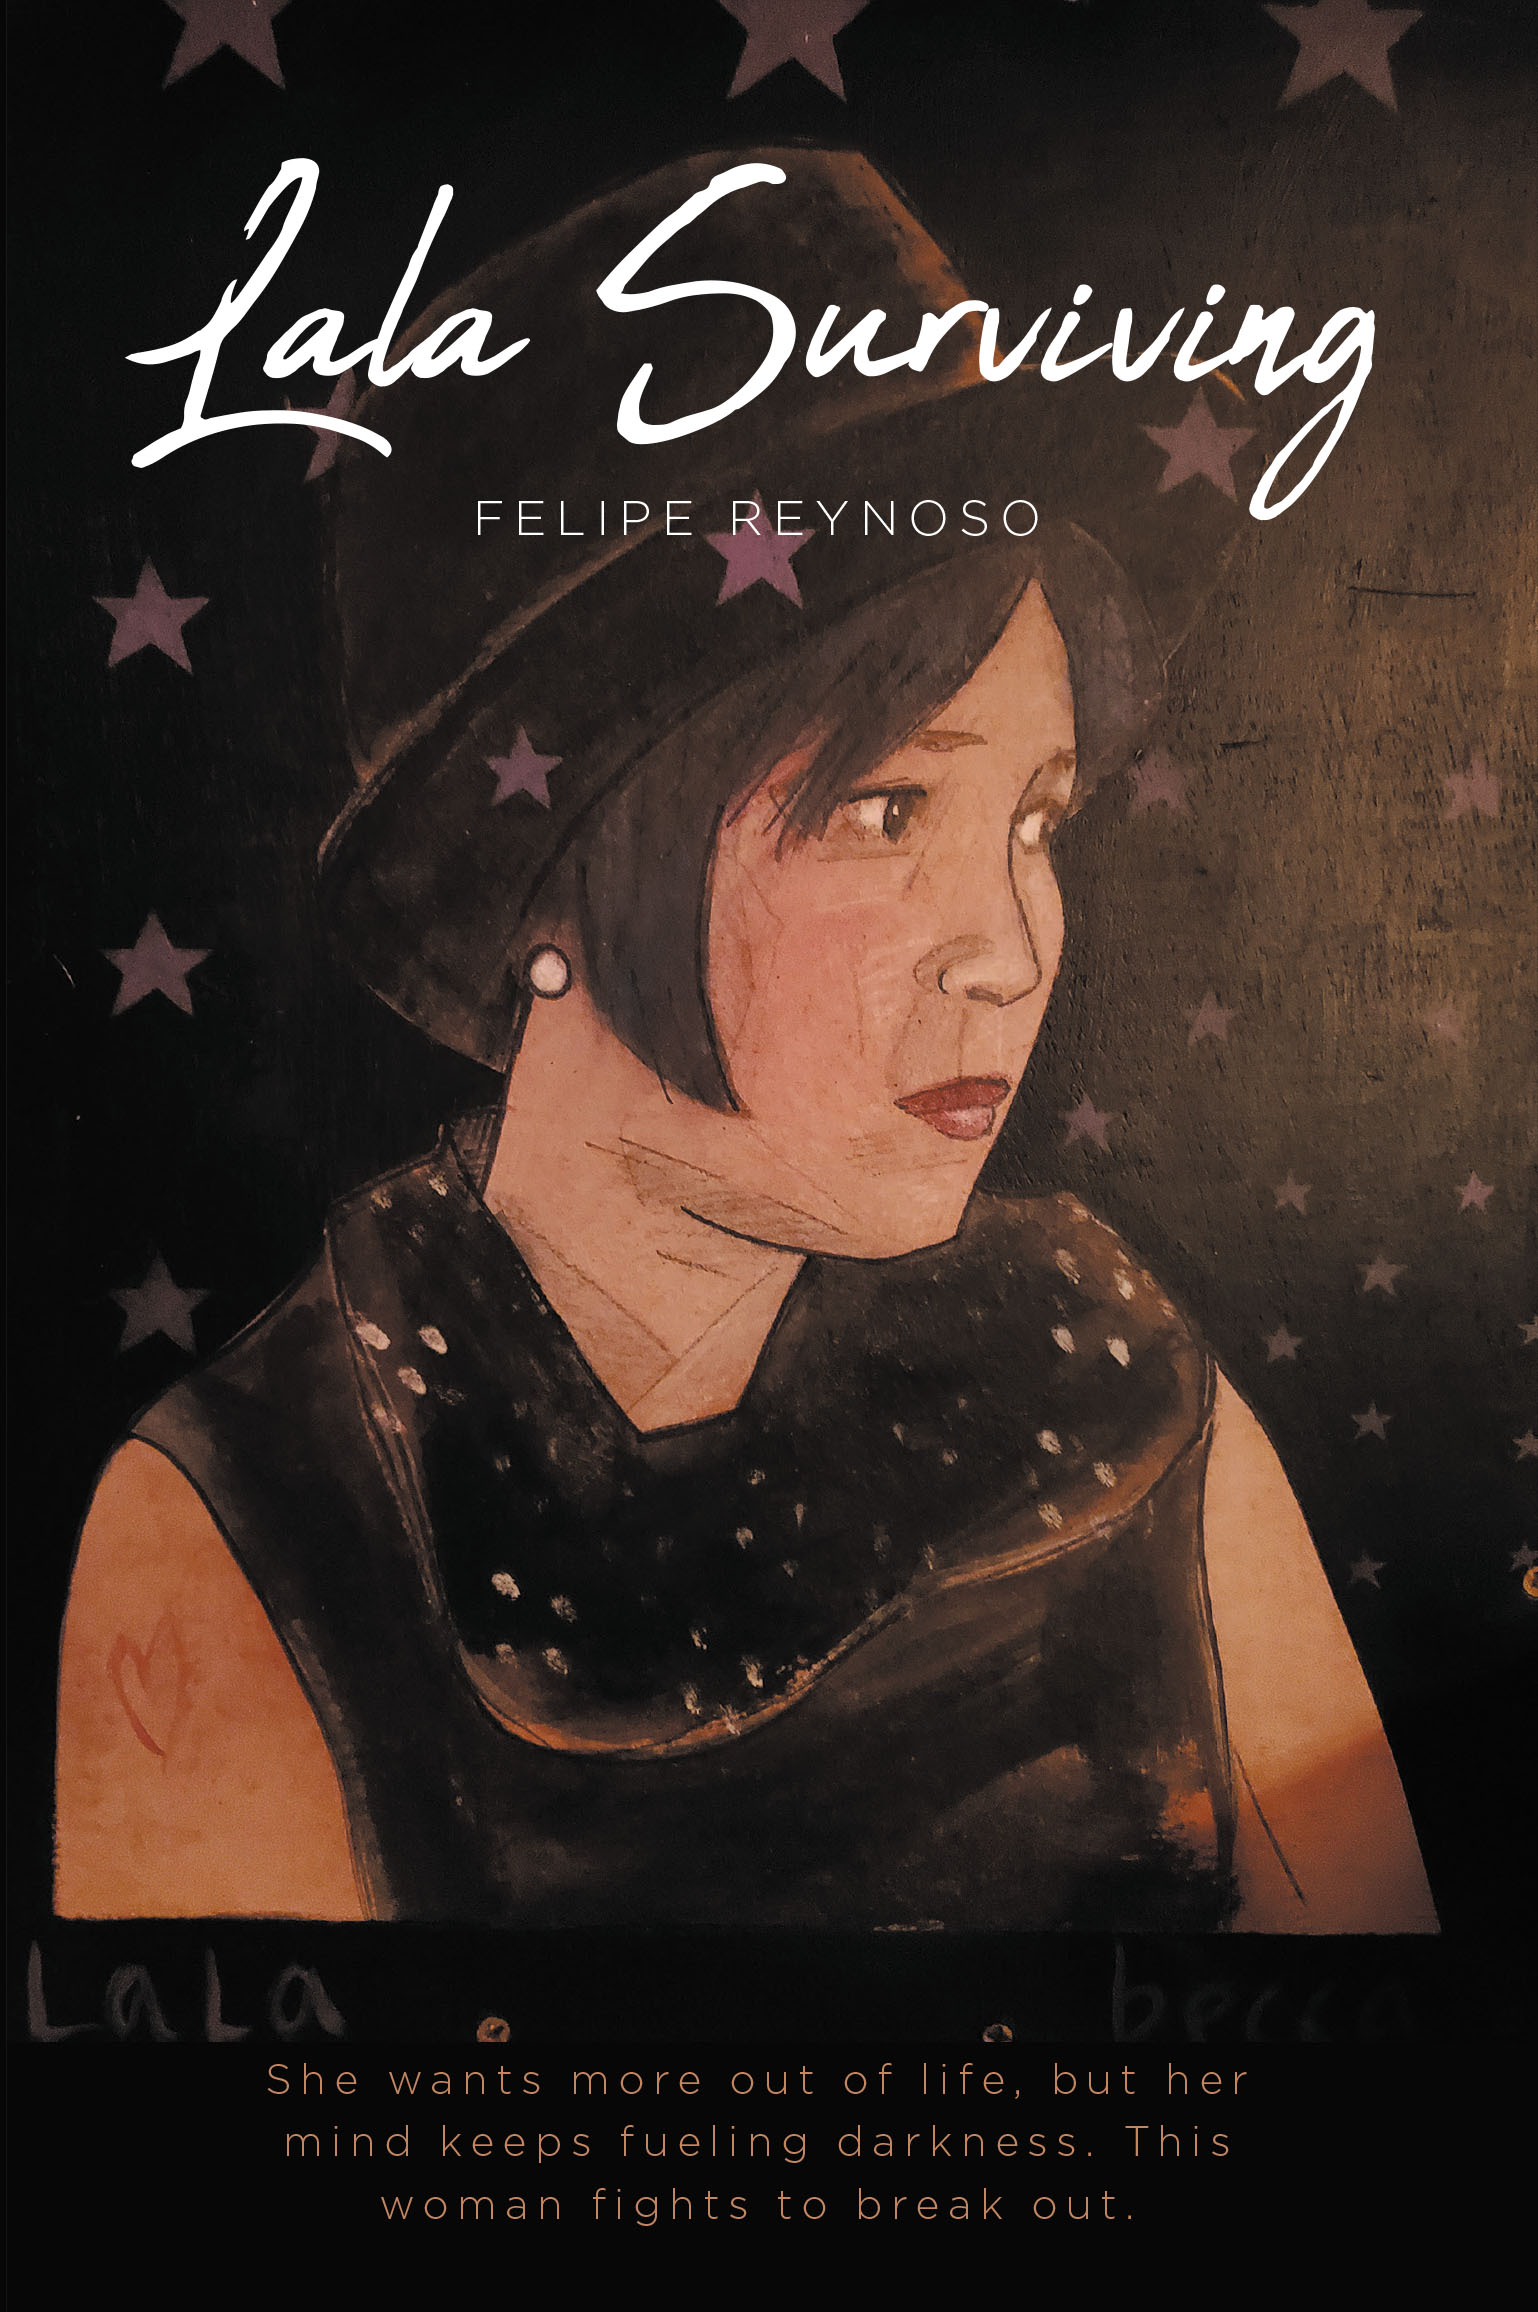 Felipe Reynoso’s New Book, “LALA Surviving,” is a Captivating Story of a Young Woman Who Refuses to Let Her Personal Struggles Stop Her from Achieving Her Goals in Life